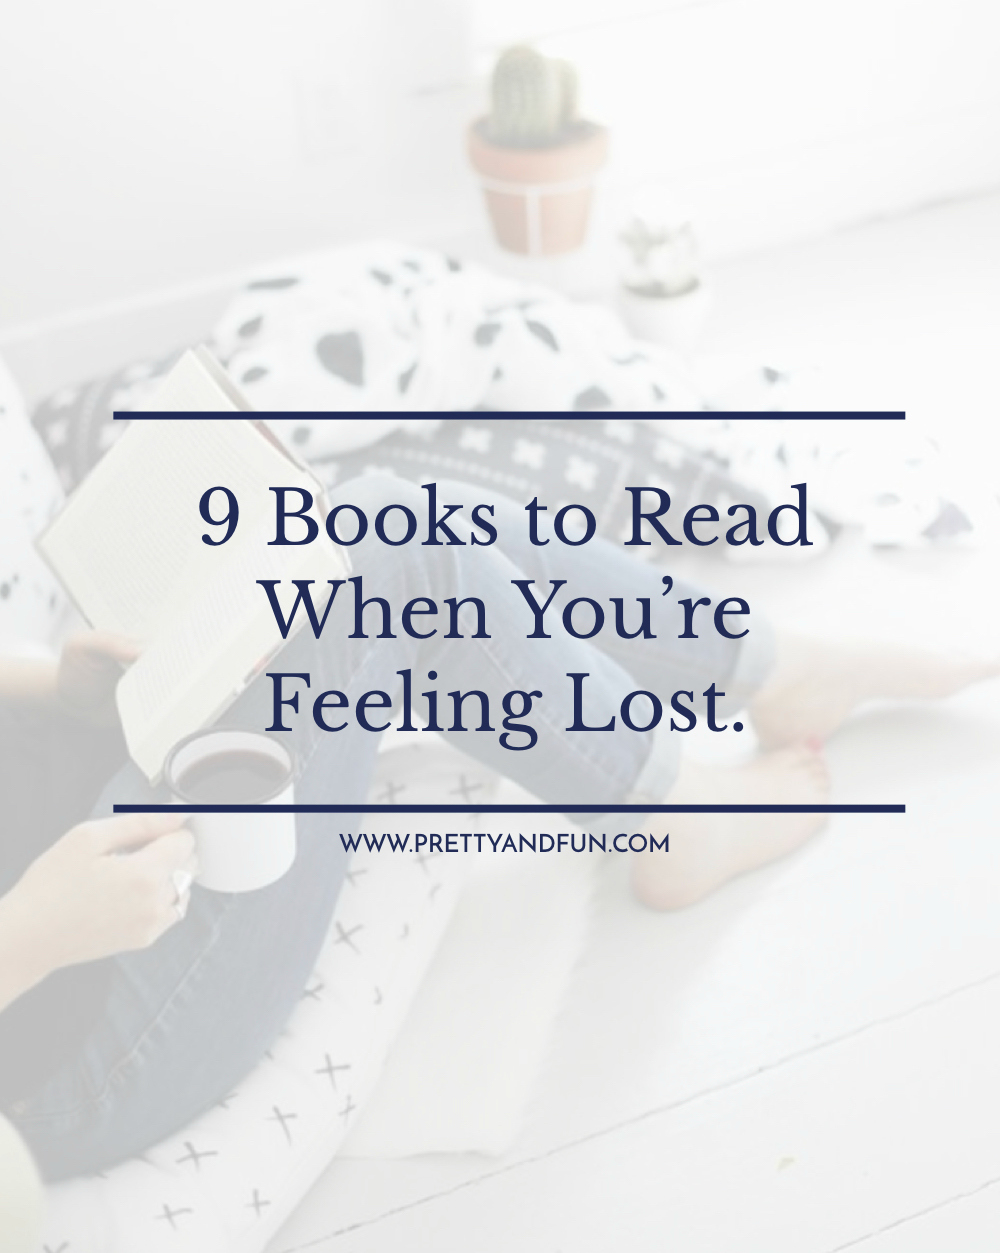 9 Books to Read When You're Feeling Lost